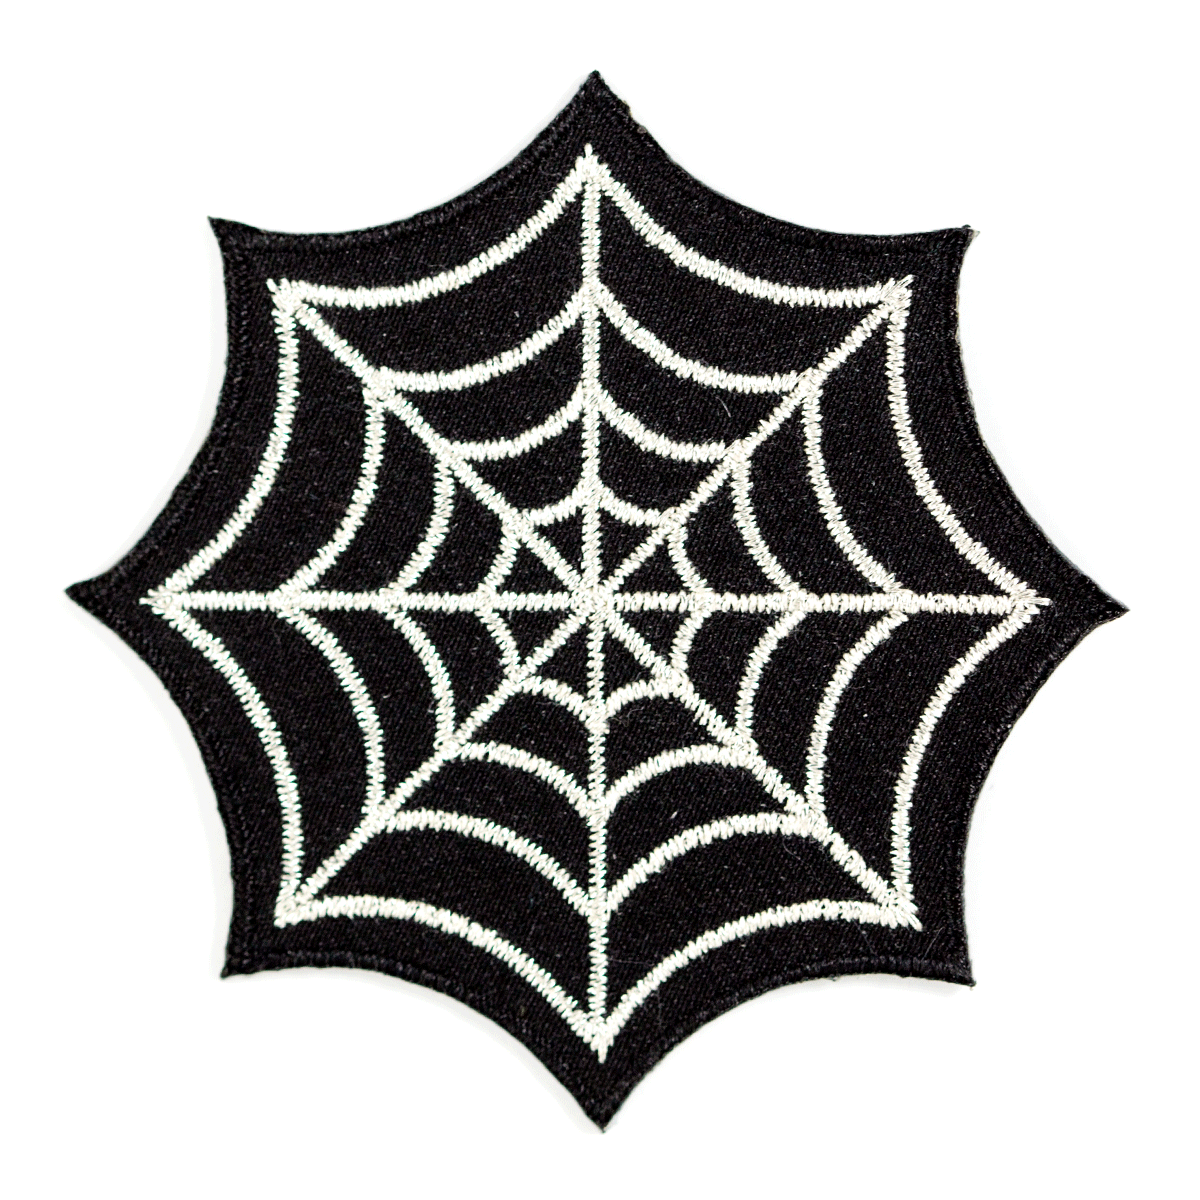 Spider Web Embroidered Iron-On Patch